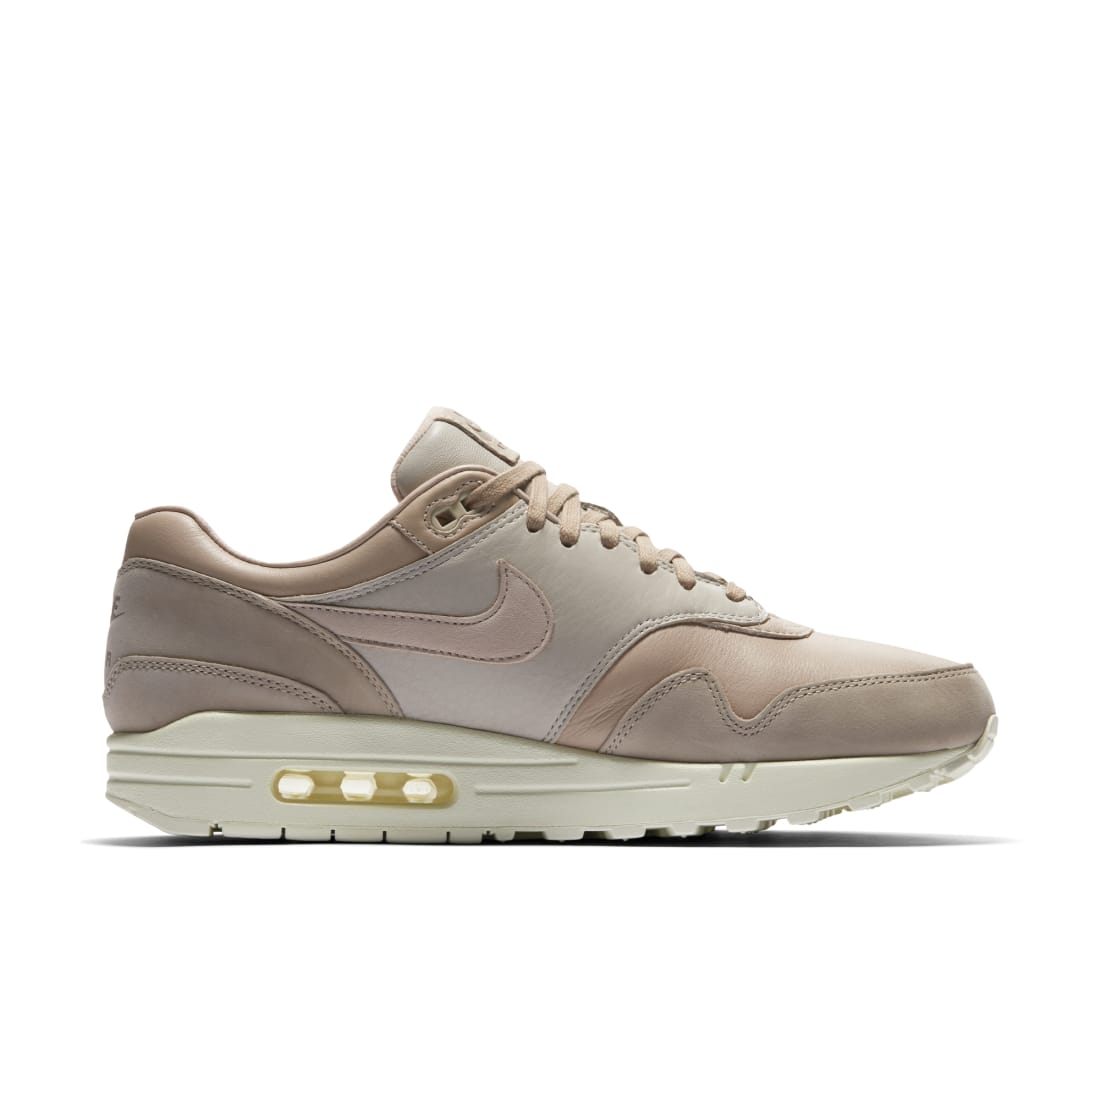 Nike Max 1 Pinnacle Sand | Nike | Release Dates, Sneaker Calendar, Prices Collaborations